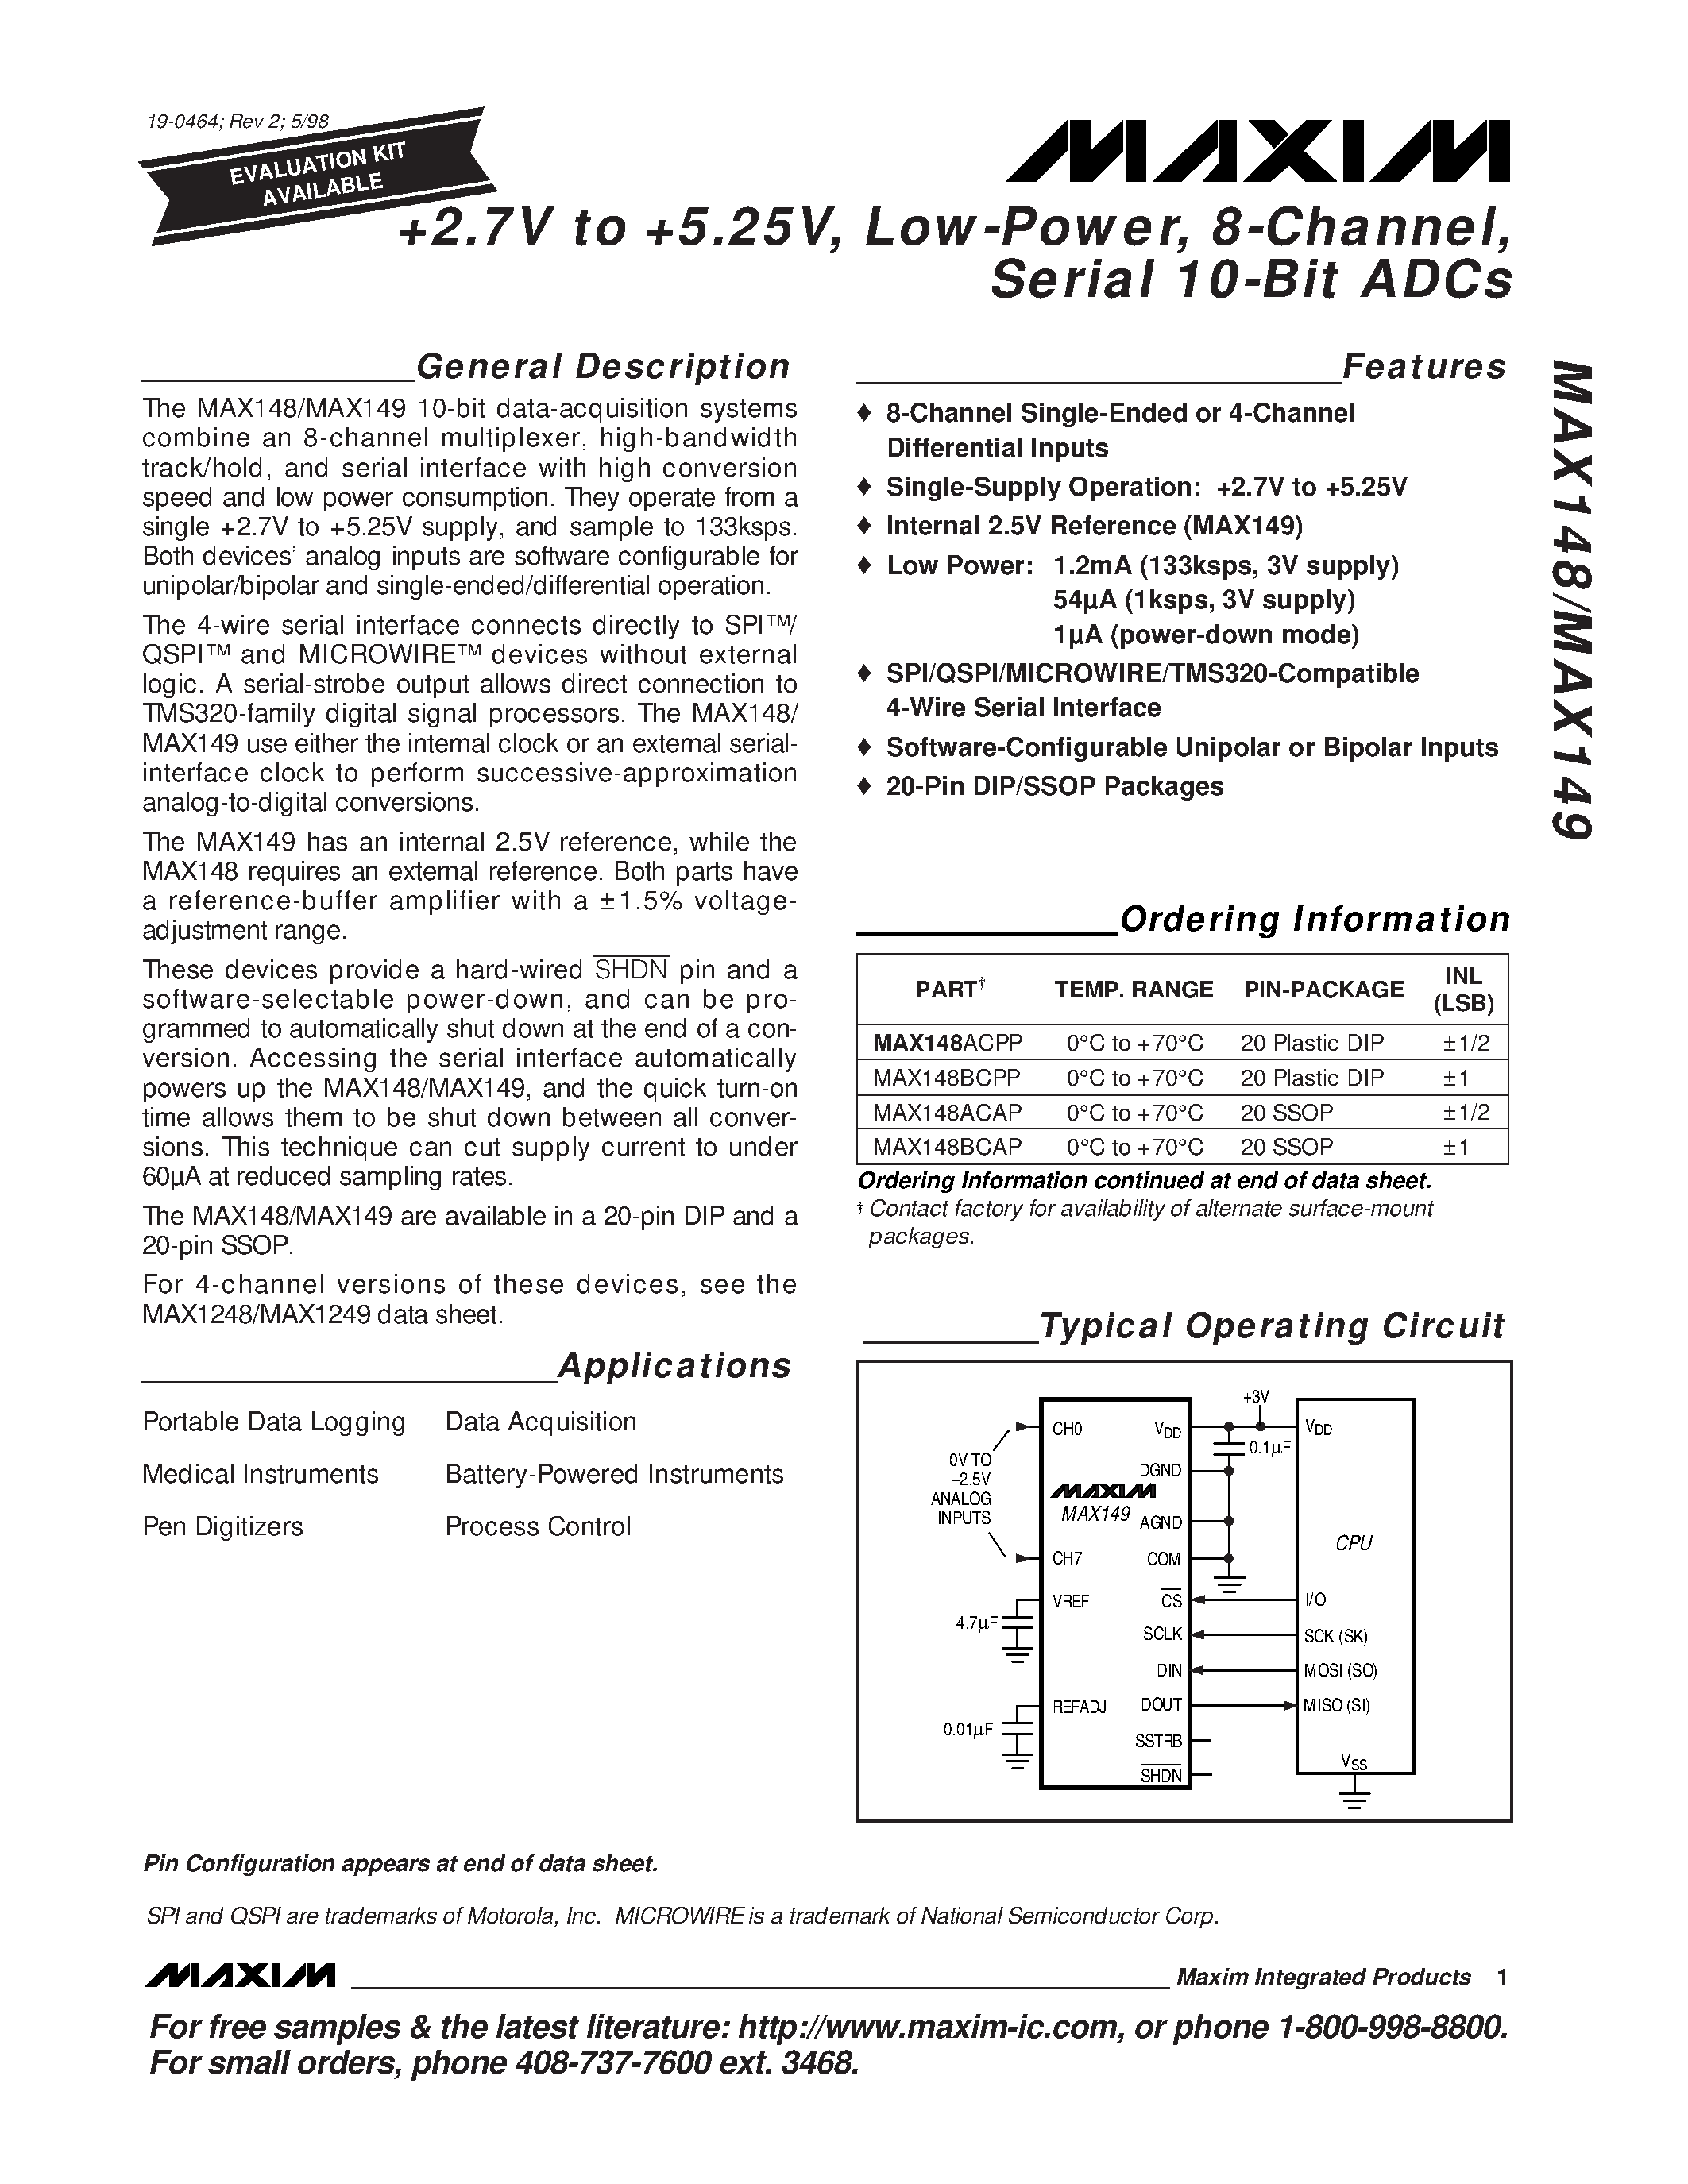 Datasheet MAX148-MAX149 - +2.7V to +5.25V / Low-Power / 8-Channel / Serial 10-Bit ADCs page 1